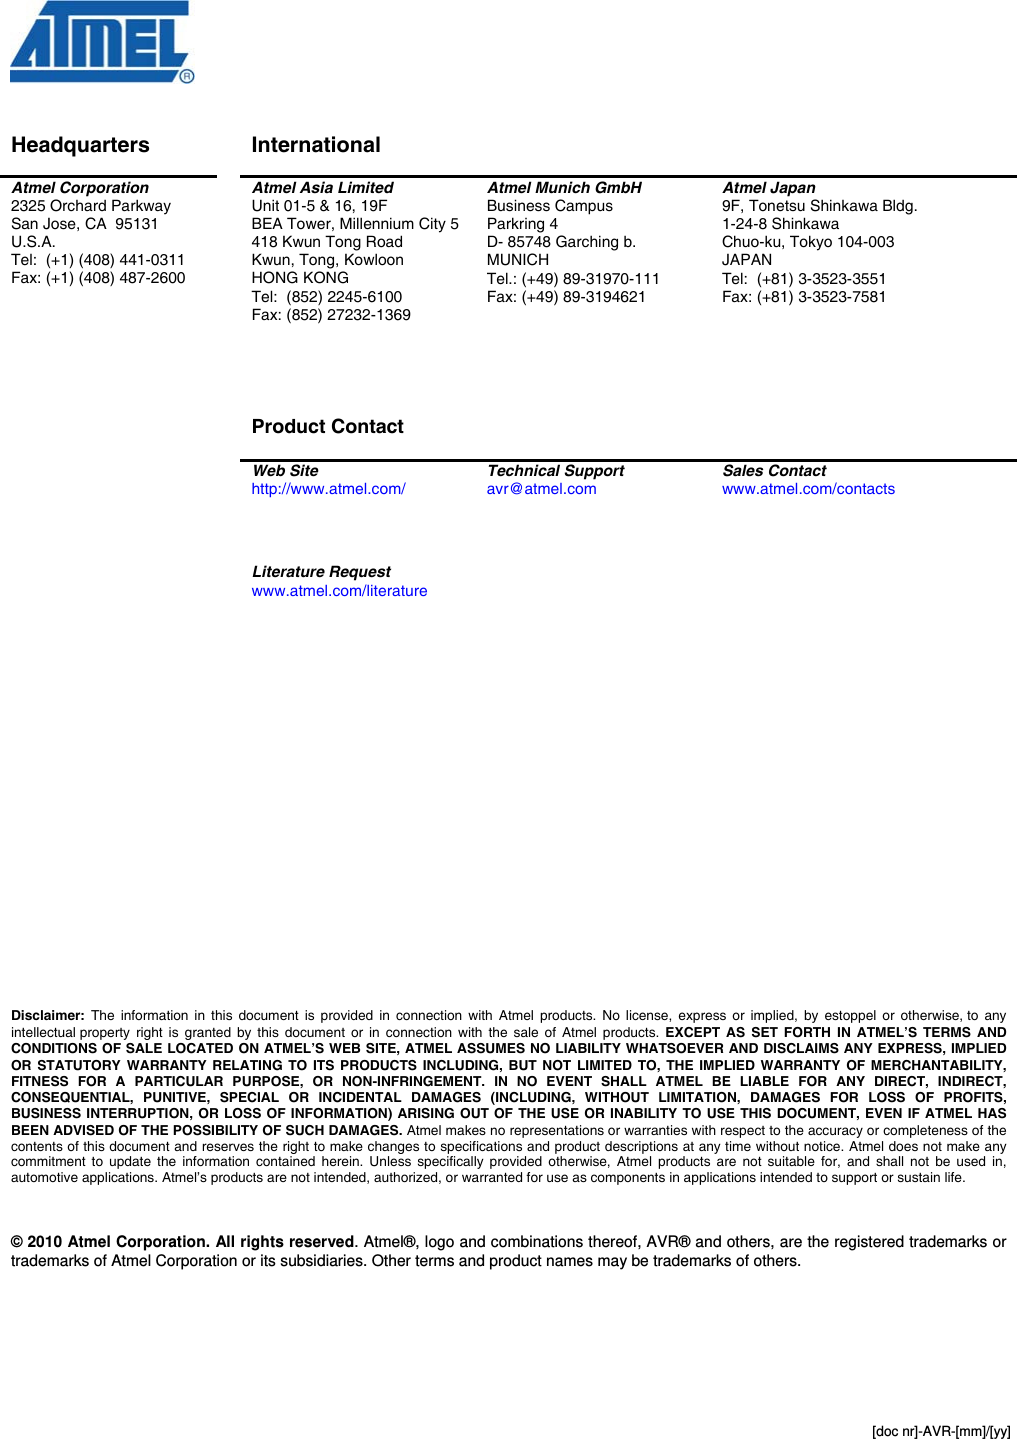  [doc nr]-AVR-[mm]/[yy]   Disclaimer Headquarters  International    Atmel Corporation 2325 Orchard Parkway San Jose, CA  95131 U.S.A. Tel:  (+1) (408) 441-0311 Fax: (+1) (408) 487-2600  Atmel Asia Limited Unit 01-5 &amp; 16, 19F BEA Tower, Millennium City 5 418 Kwun Tong Road Kwun, Tong, Kowloon HONG KONG Tel:  (852) 2245-6100 Fax: (852) 27232-1369     Product Contact  Atmel Munich GmbH Business Campus Parkring 4 D- 85748 Garching b.  MUNICH Tel.: (+49) 89-31970-111 Fax: (+49) 89-3194621 Atmel Japan 9F, Tonetsu Shinkawa Bldg. 1-24-8 Shinkawa Chuo-ku, Tokyo 104-003 JAPAN Tel:  (+81) 3-3523-3551 Fax: (+81) 3-3523-7581  Web Site http://www.atmel.com/  Technical Support avr@atmel.com  Sales Contact www.atmel.com/contacts     Literature Request www.atmel.com/literature                            Disclaimer: The information in this document is provided in connection with Atmel products. No license, express or implied, by estoppel or otherwise, to any intellectual property right is granted by this document or in connection with the sale of Atmel products. EXCEPT AS SET FORTH IN ATMEL’S TERMS AND CONDITIONS OF SALE LOCATED ON ATMEL’S WEB SITE, ATMEL ASSUMES NO LIABILITY WHATSOEVER AND DISCLAIMS ANY EXPRESS, IMPLIED OR STATUTORY WARRANTY RELATING TO ITS PRODUCTS INCLUDING, BUT NOT LIMITED TO, THE IMPLIED WARRANTY OF MERCHANTABILITY, FITNESS FOR A PARTICULAR PURPOSE, OR NON-INFRINGEMENT. IN NO EVENT SHALL ATMEL BE LIABLE FOR ANY DIRECT, INDIRECT, CONSEQUENTIAL, PUNITIVE, SPECIAL OR INCIDENTAL DAMAGES (INCLUDING, WITHOUT LIMITATION, DAMAGES FOR LOSS OF PROFITS, BUSINESS INTERRUPTION, OR LOSS OF INFORMATION) ARISING OUT OF THE USE OR INABILITY TO USE THIS DOCUMENT, EVEN IF ATMEL HAS BEEN ADVISED OF THE POSSIBILITY OF SUCH DAMAGES. Atmel makes no representations or warranties with respect to the accuracy or completeness of the contents of this document and reserves the right to make changes to specifications and product descriptions at any time without notice. Atmel does not make any commitment to update the information contained herein. Unless specifically provided otherwise, Atmel products are not suitable for, and shall not be used in, automotive applications. Atmel’s products are not intended, authorized, or warranted for use as components in applications intended to support or sustain life.    © 2010 Atmel Corporation. All rights reserved. Atmel®, logo and combinations thereof, AVR® and others, are the registered trademarks or trademarks of Atmel Corporation or its subsidiaries. Other terms and product names may be trademarks of others.   